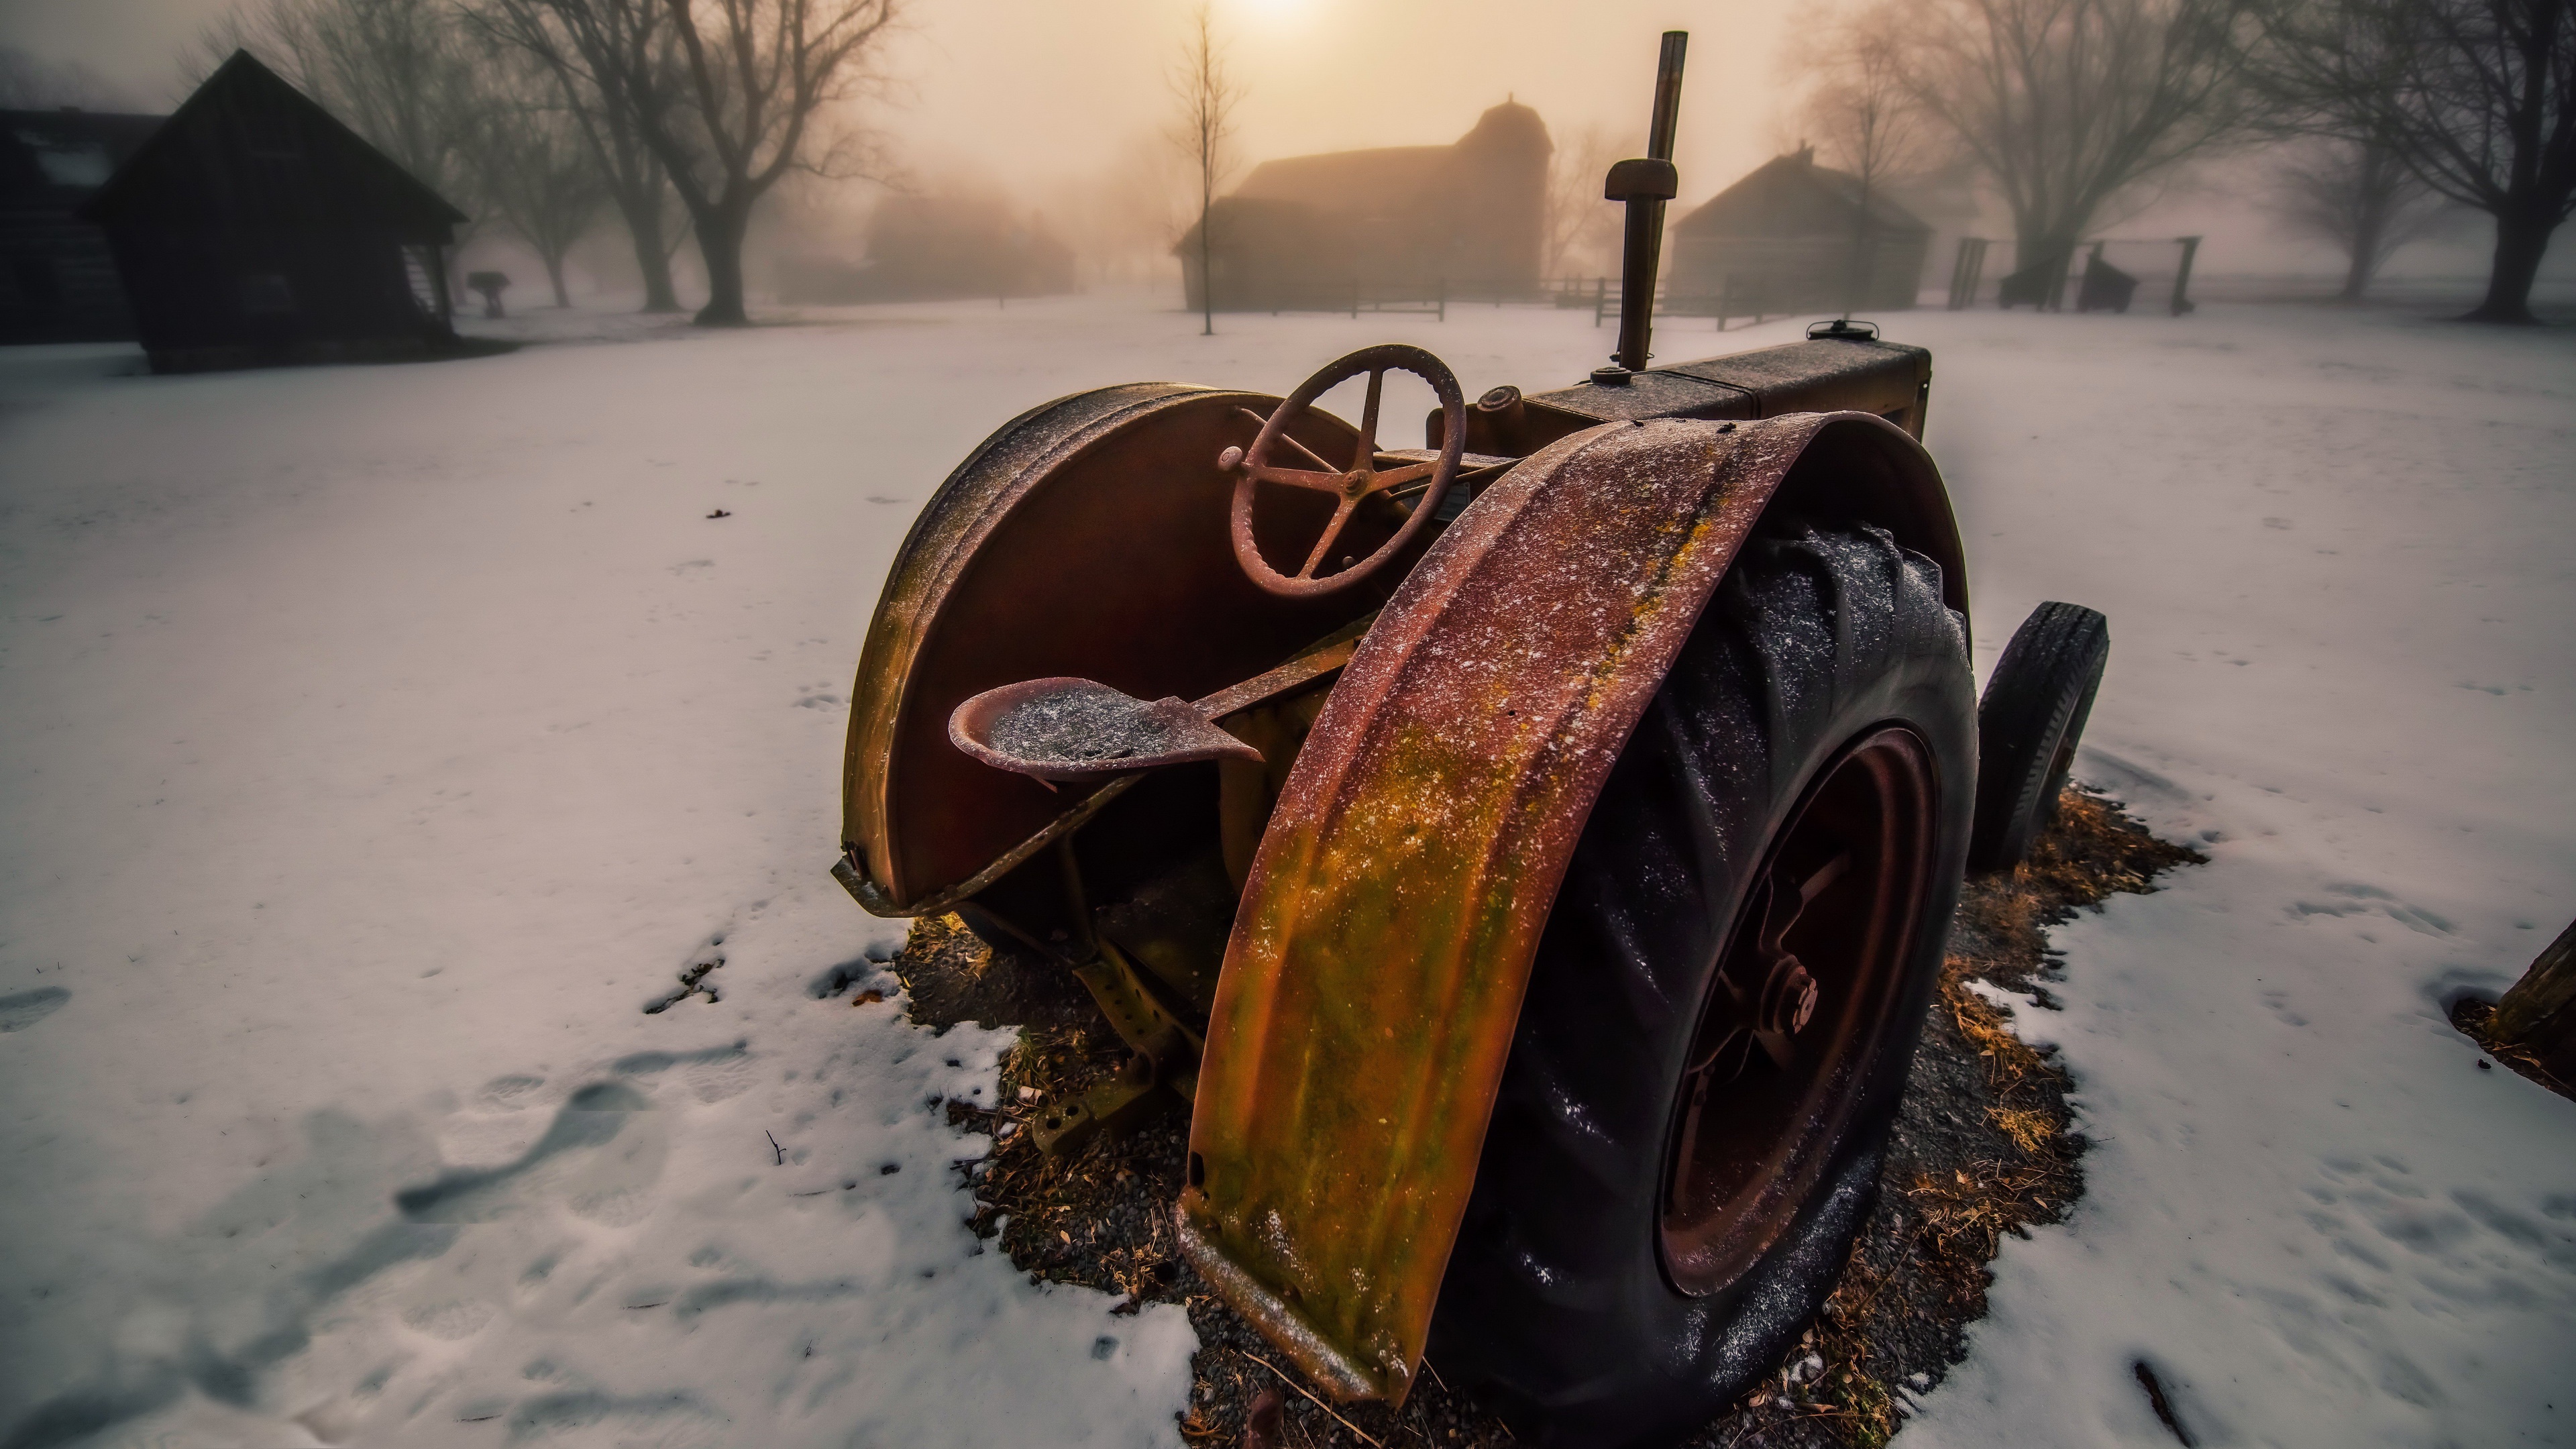 General 3840x2160 vehicle tractors cold winter snow outdoors rust